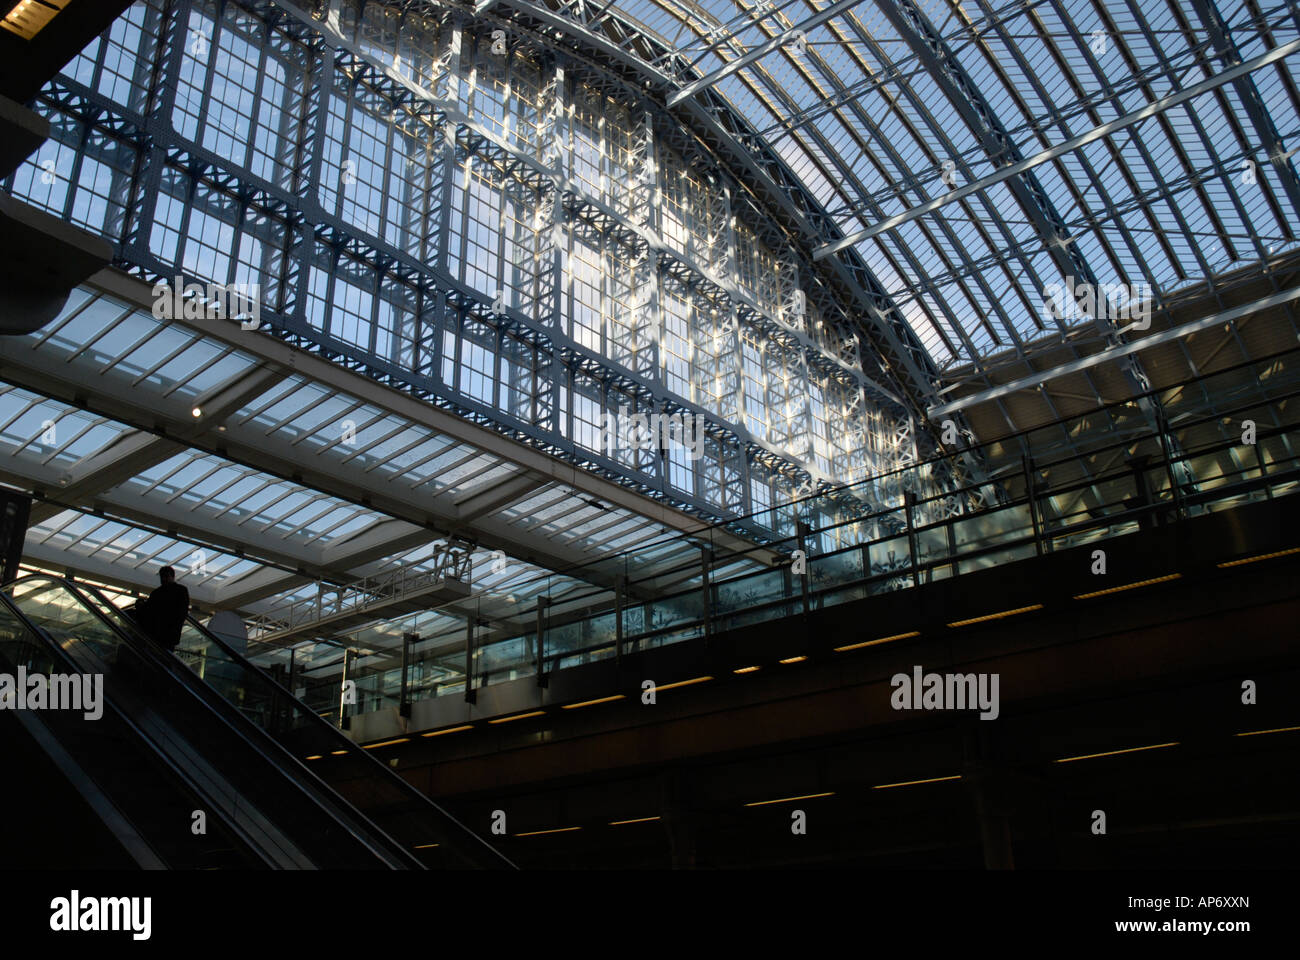 Interior of St Pancras International railway station showing roof and escalator Stock Photo